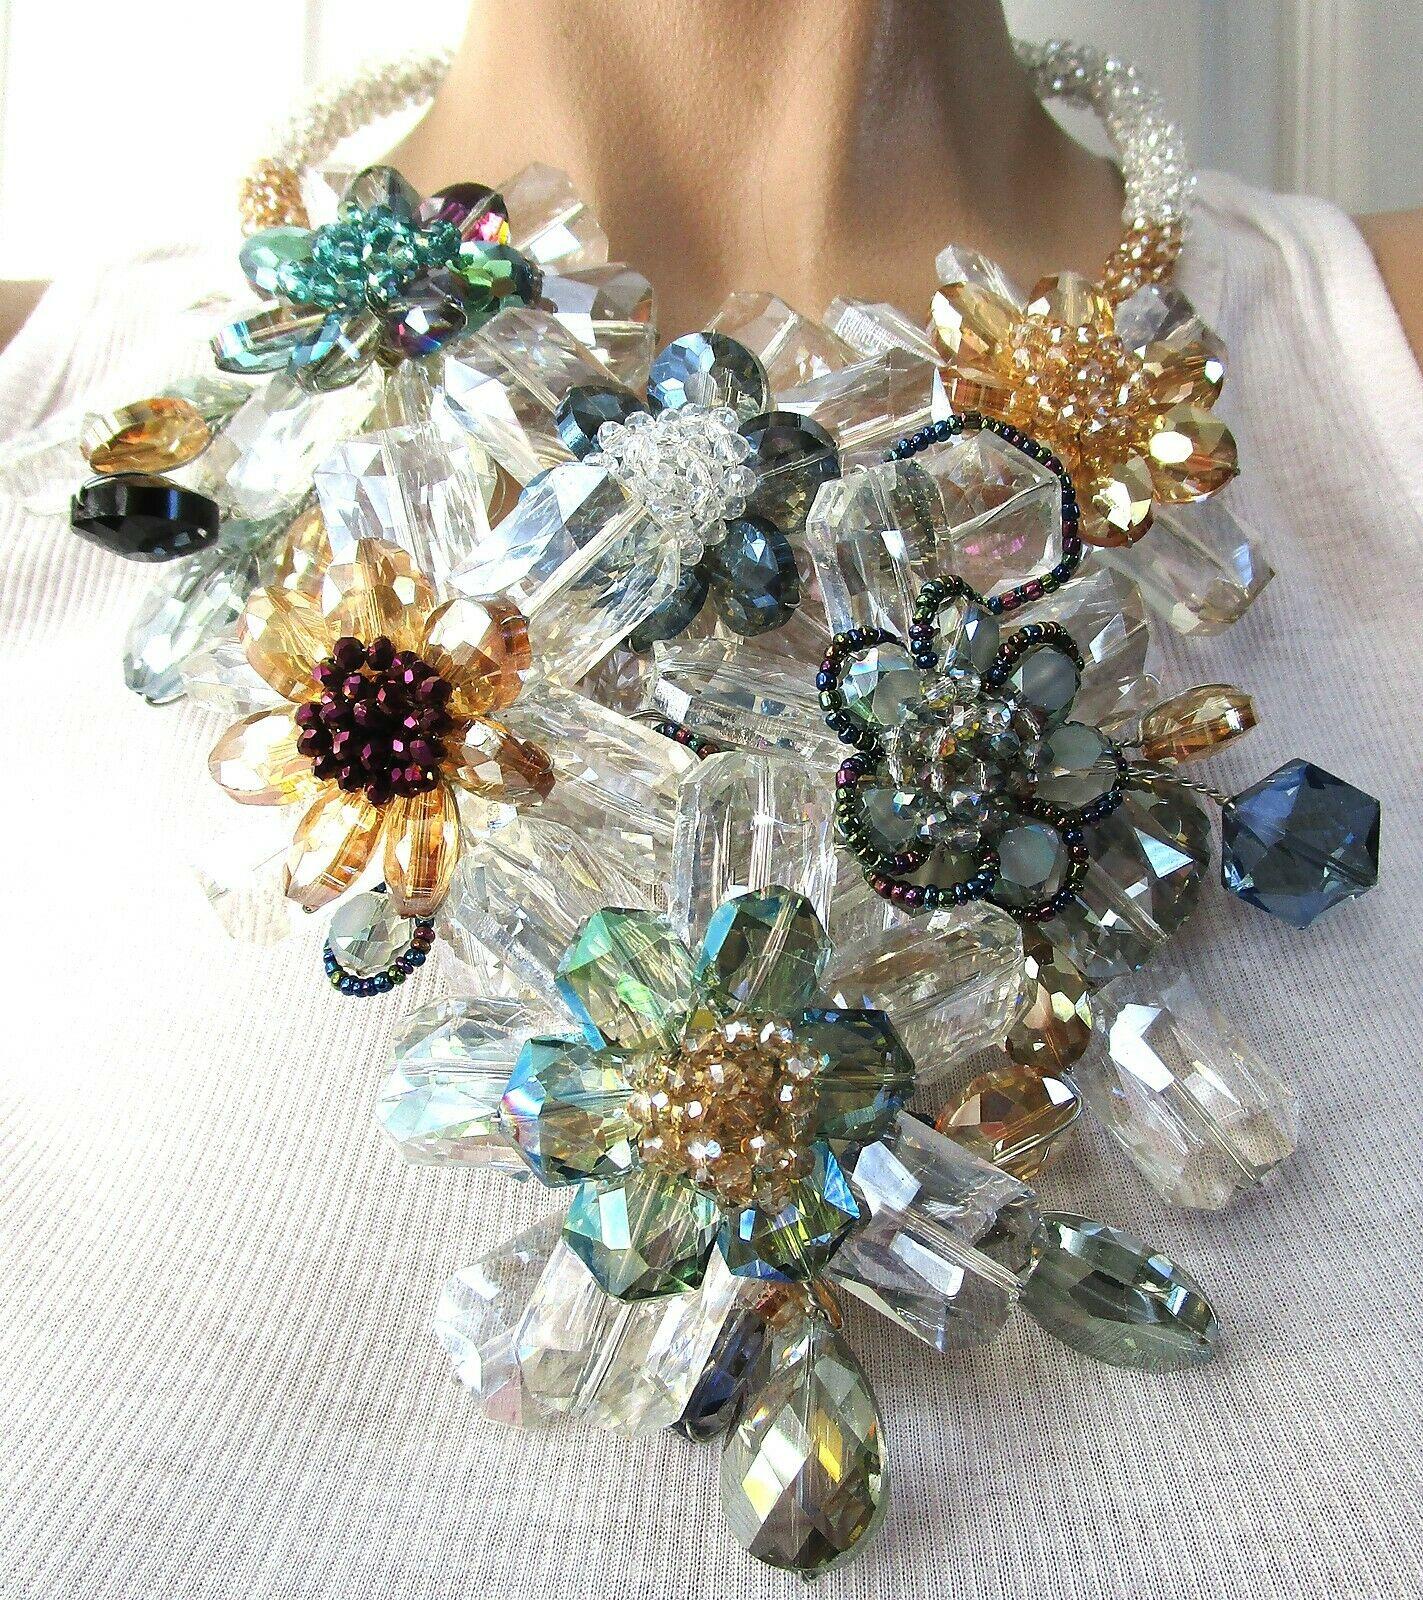 Awesome Necklace featuring a massive Bib of Crystal Flowers with wire Crystal wrapped Collar. Necklace measures approx. 20